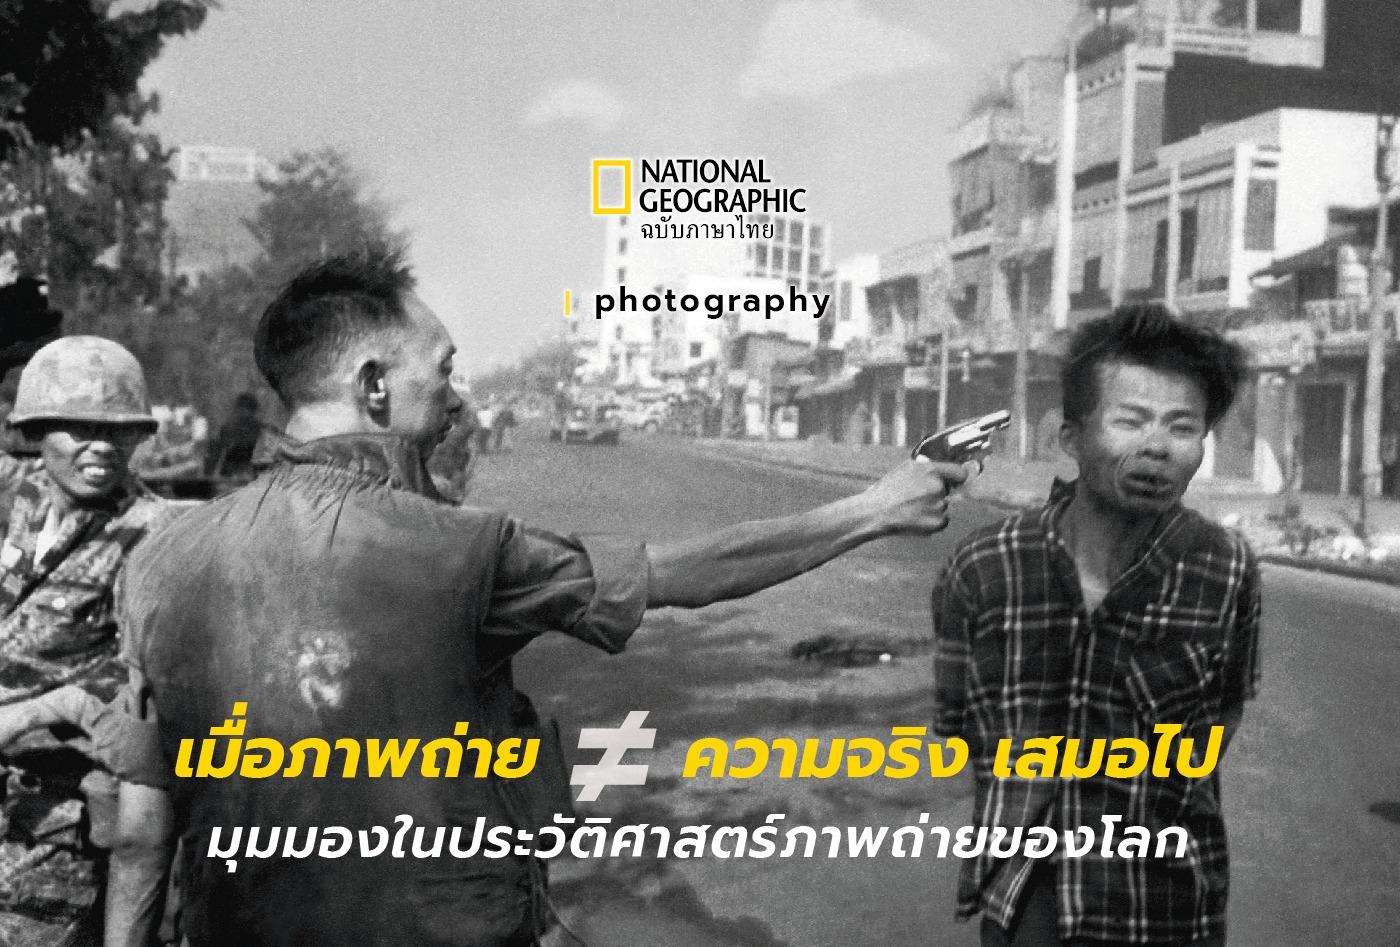 Thumbnail of "Photography vs truth" in Nat Geo Thailand